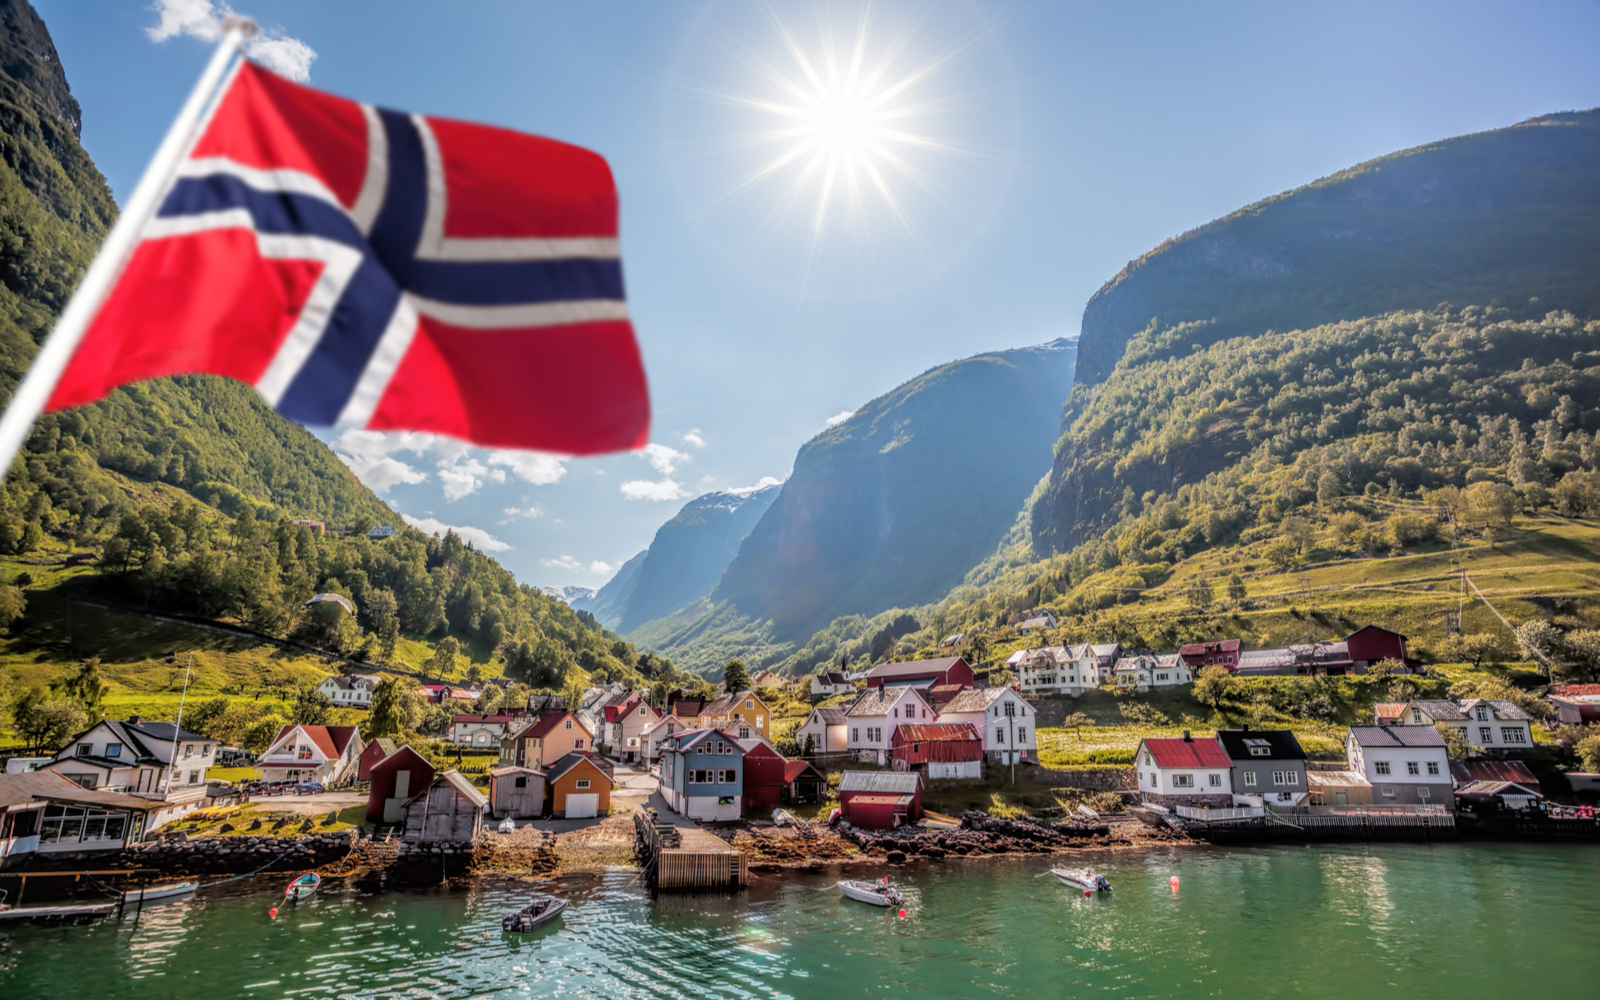 Featured image for a piece on the best time to visit Norway featuring the flag waving in front of a waterside village